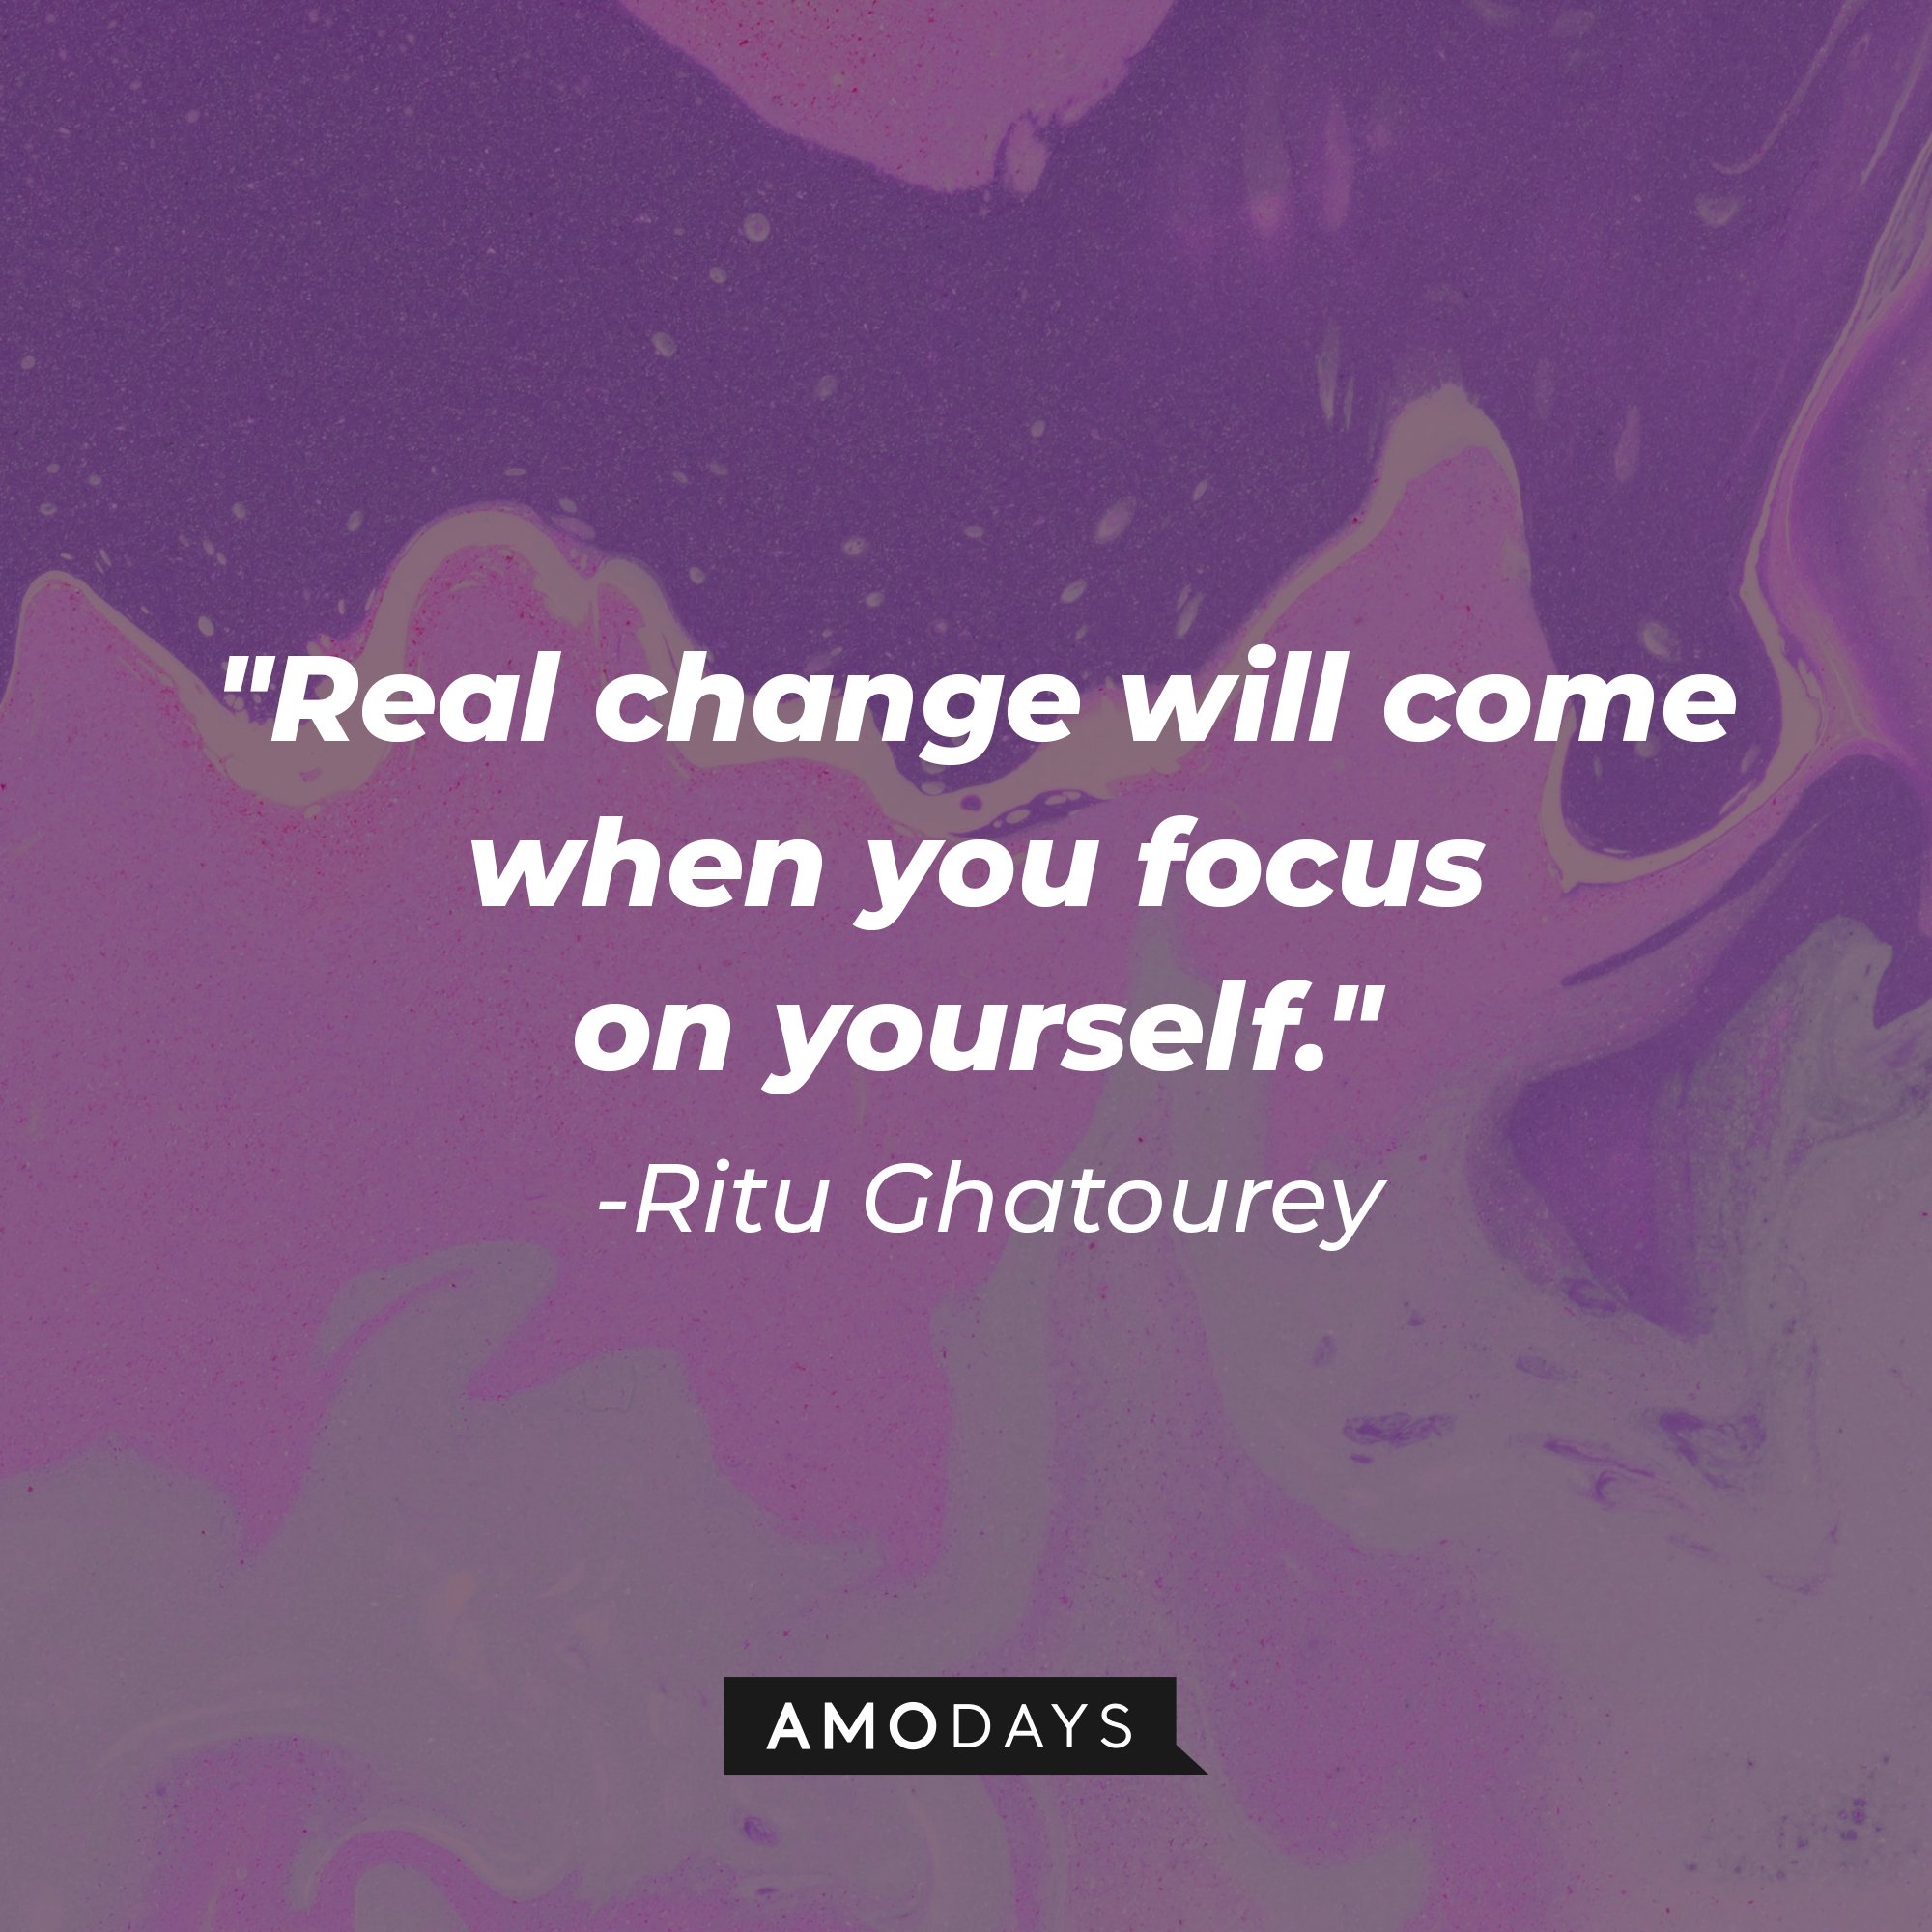 Ritu Ghatourey’s quote: "Real change will come when you focus on yourself." | Image: AmoDays